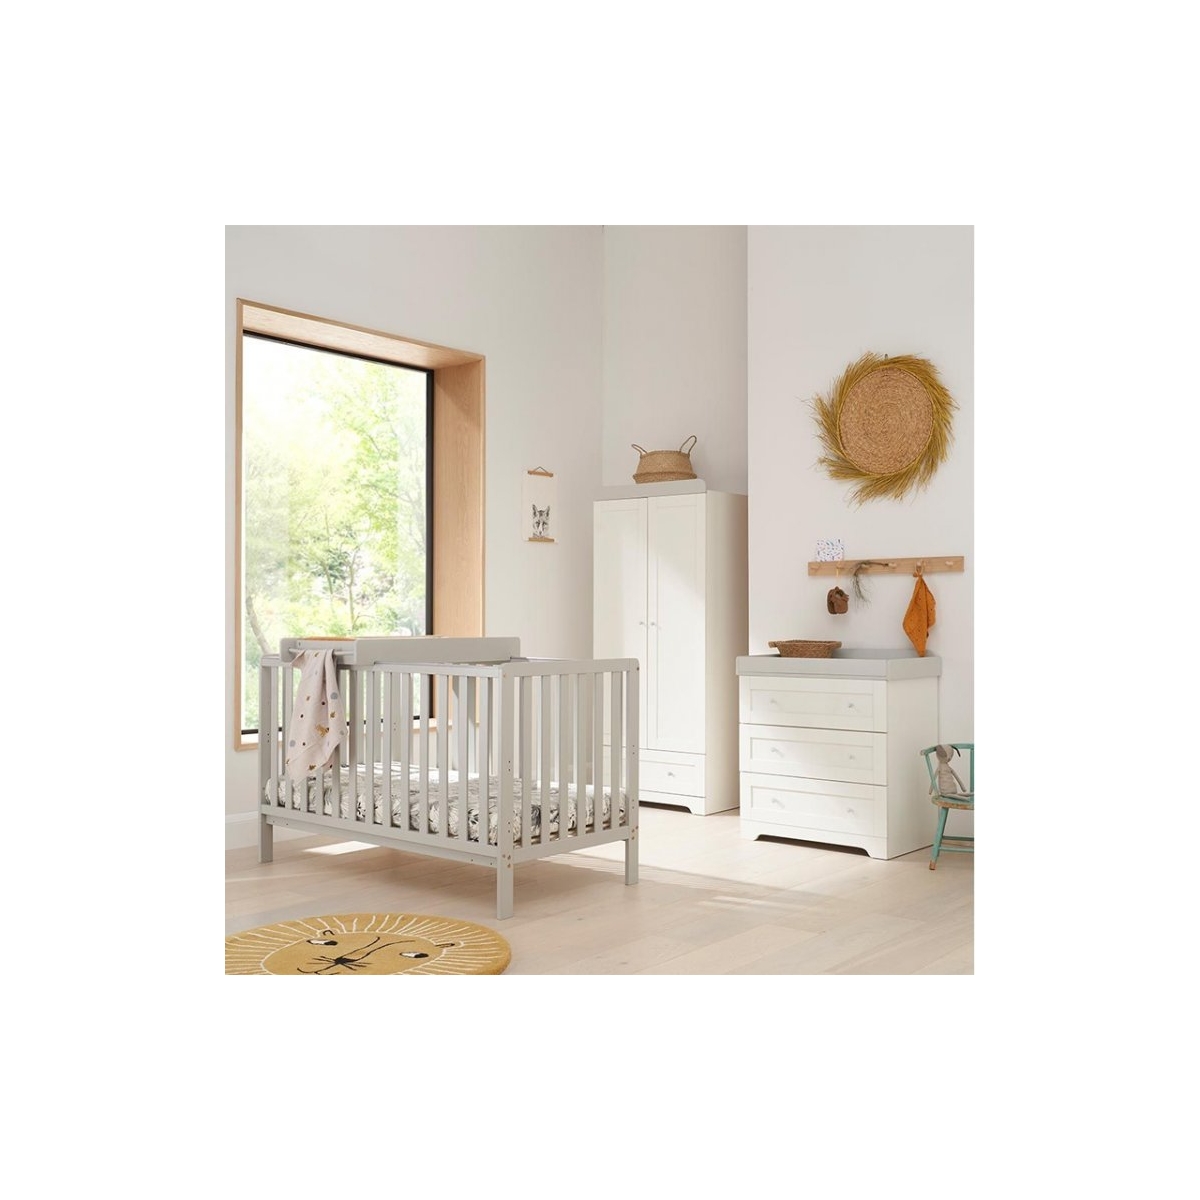 Tutti Bambini Malmo 3 Piece Room Set with Cot Top Changer